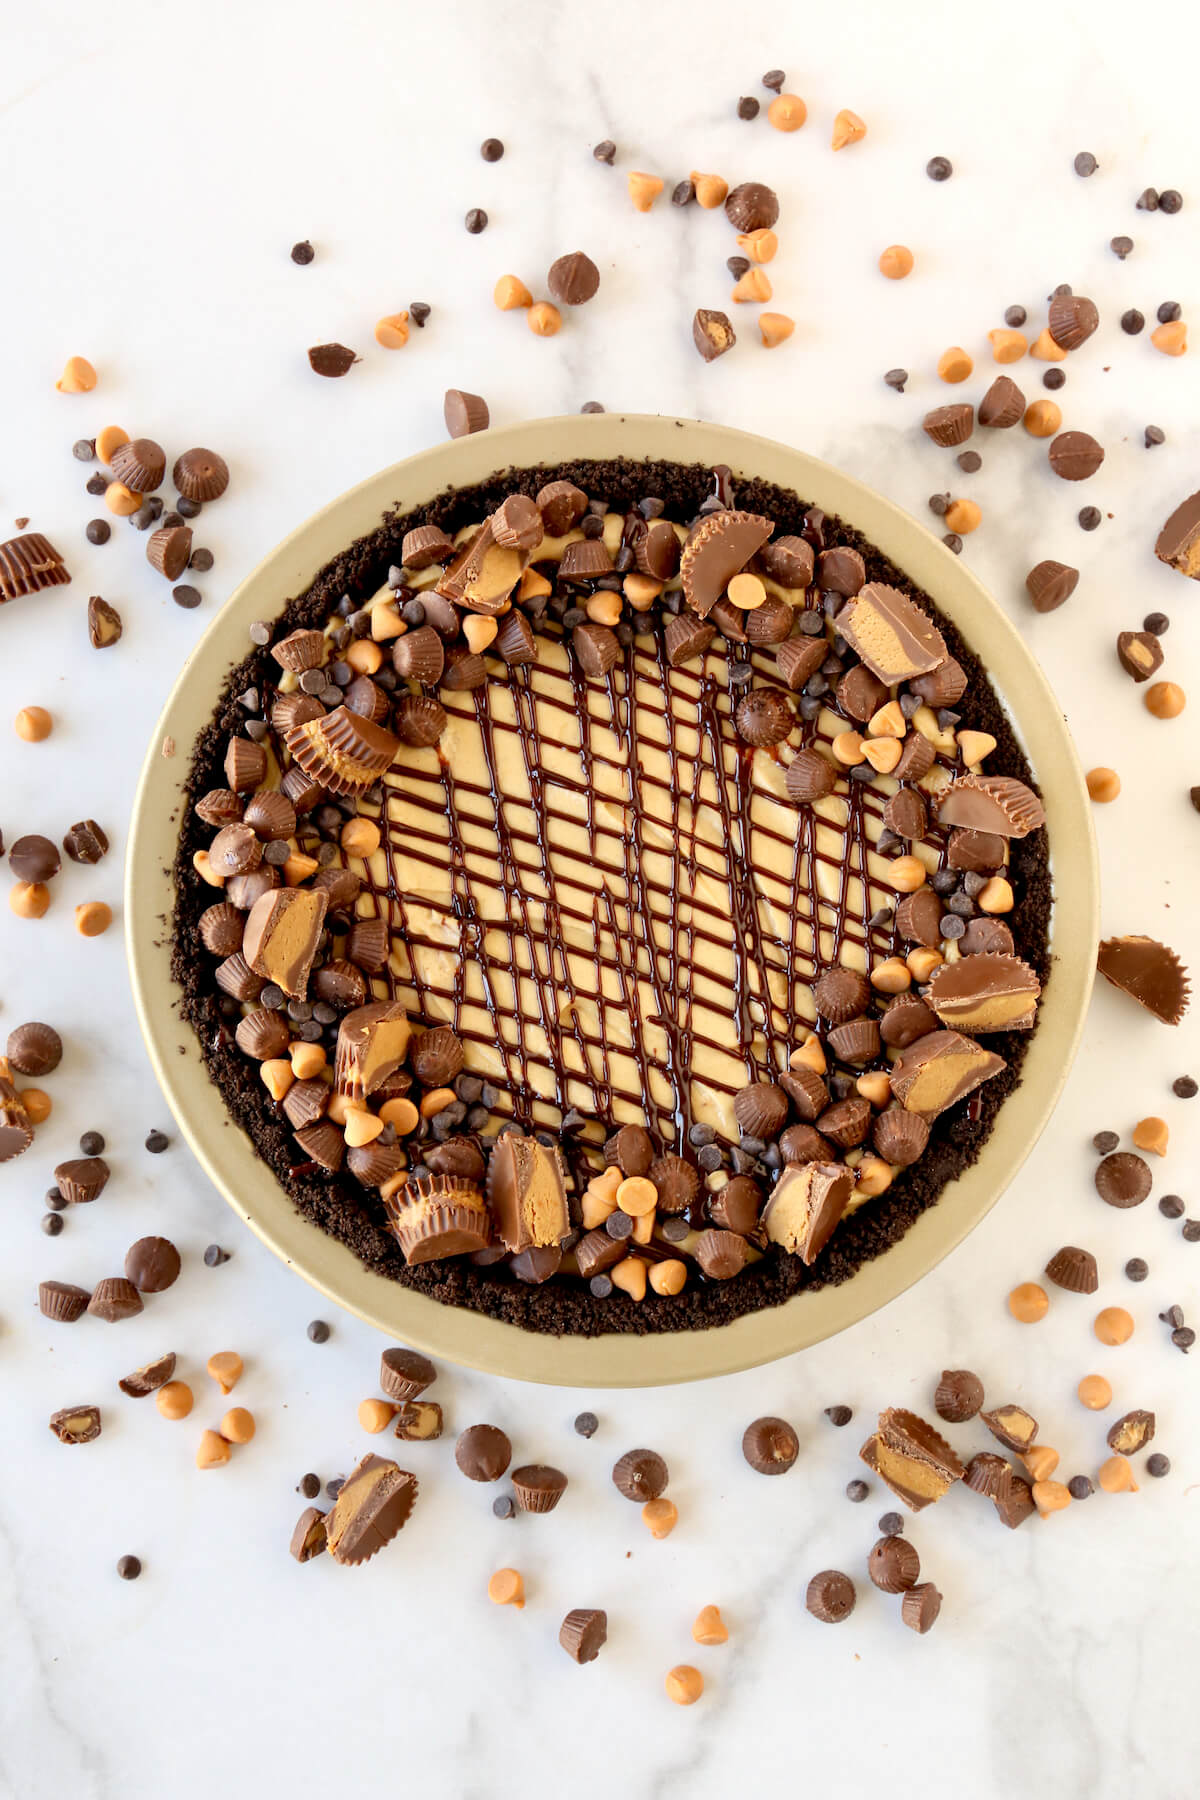 A round pie with chocolate crust, peanut butter filling and reeses candies covering the top and surrounding the pie.  